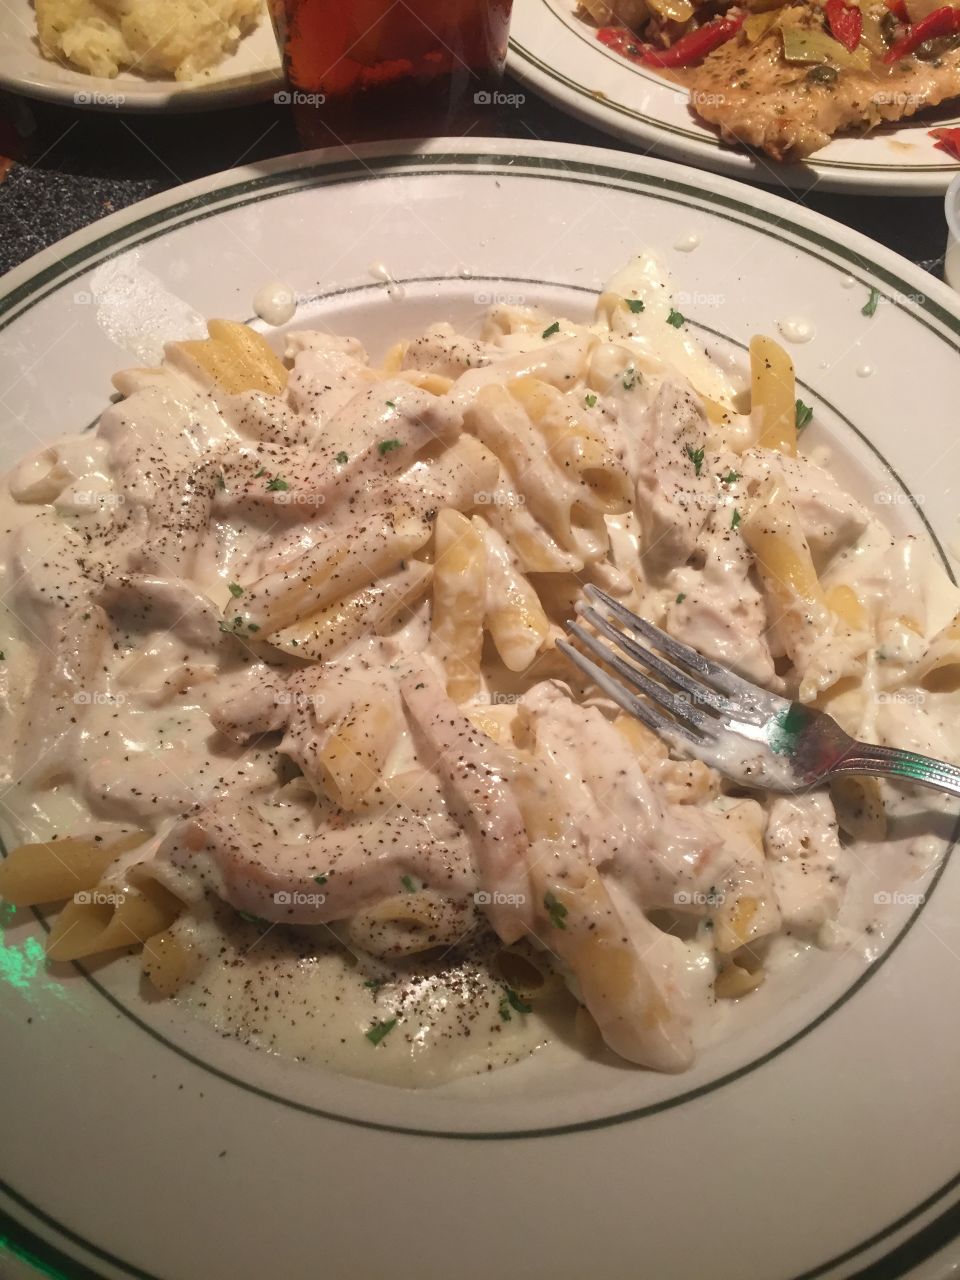 Gluten free free chicken alfredo my absolute favorite pasta dish. So cheesy and filling